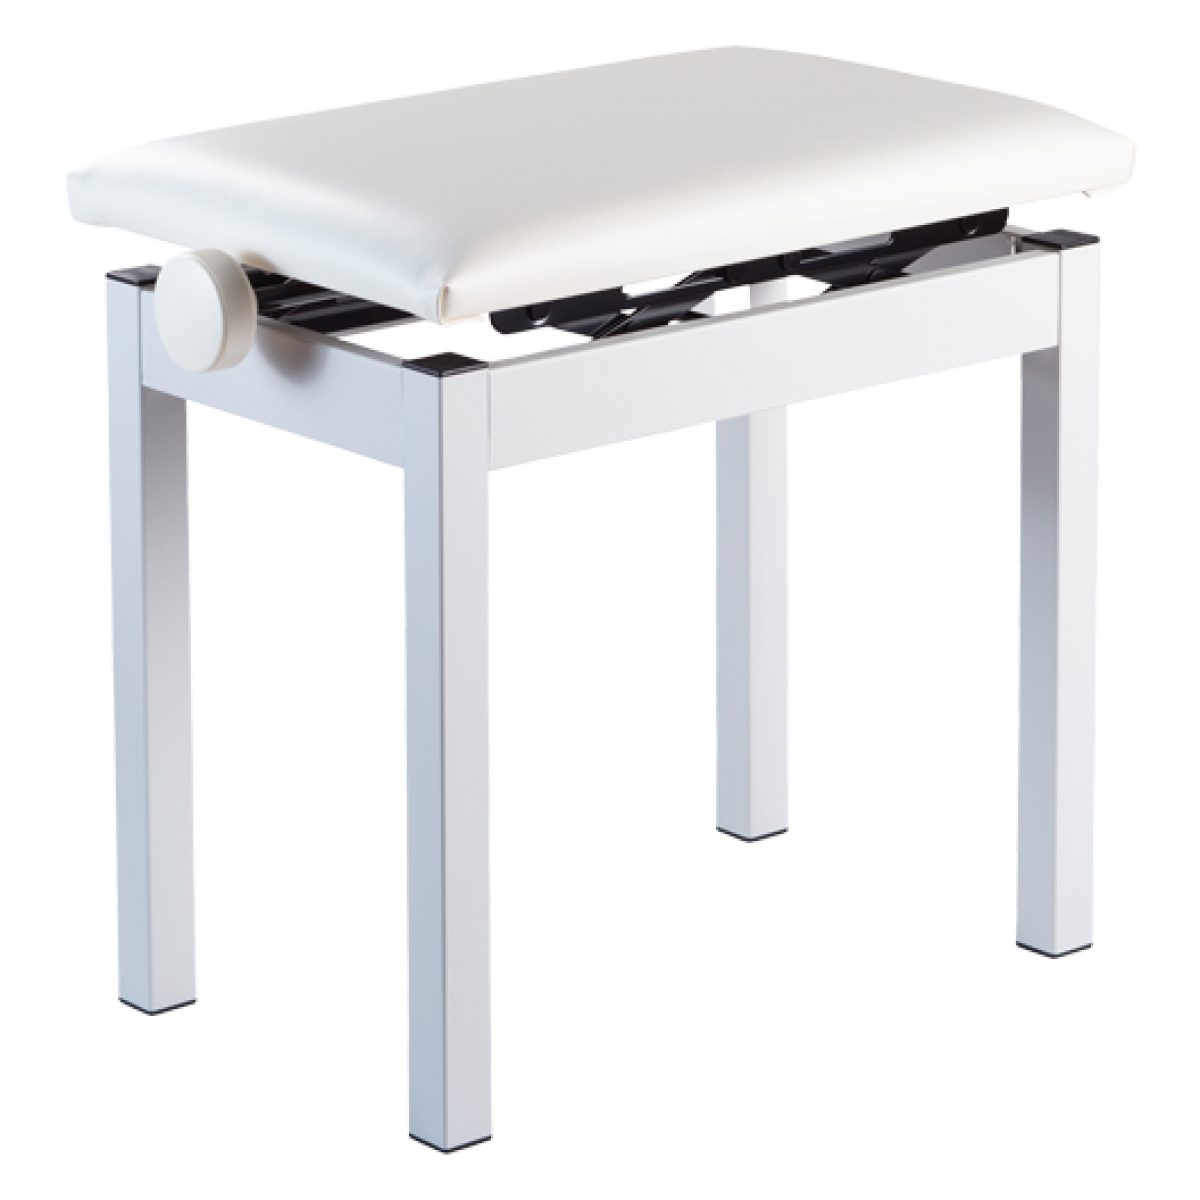 Modern Piano Bench PNG Image Transparent Background